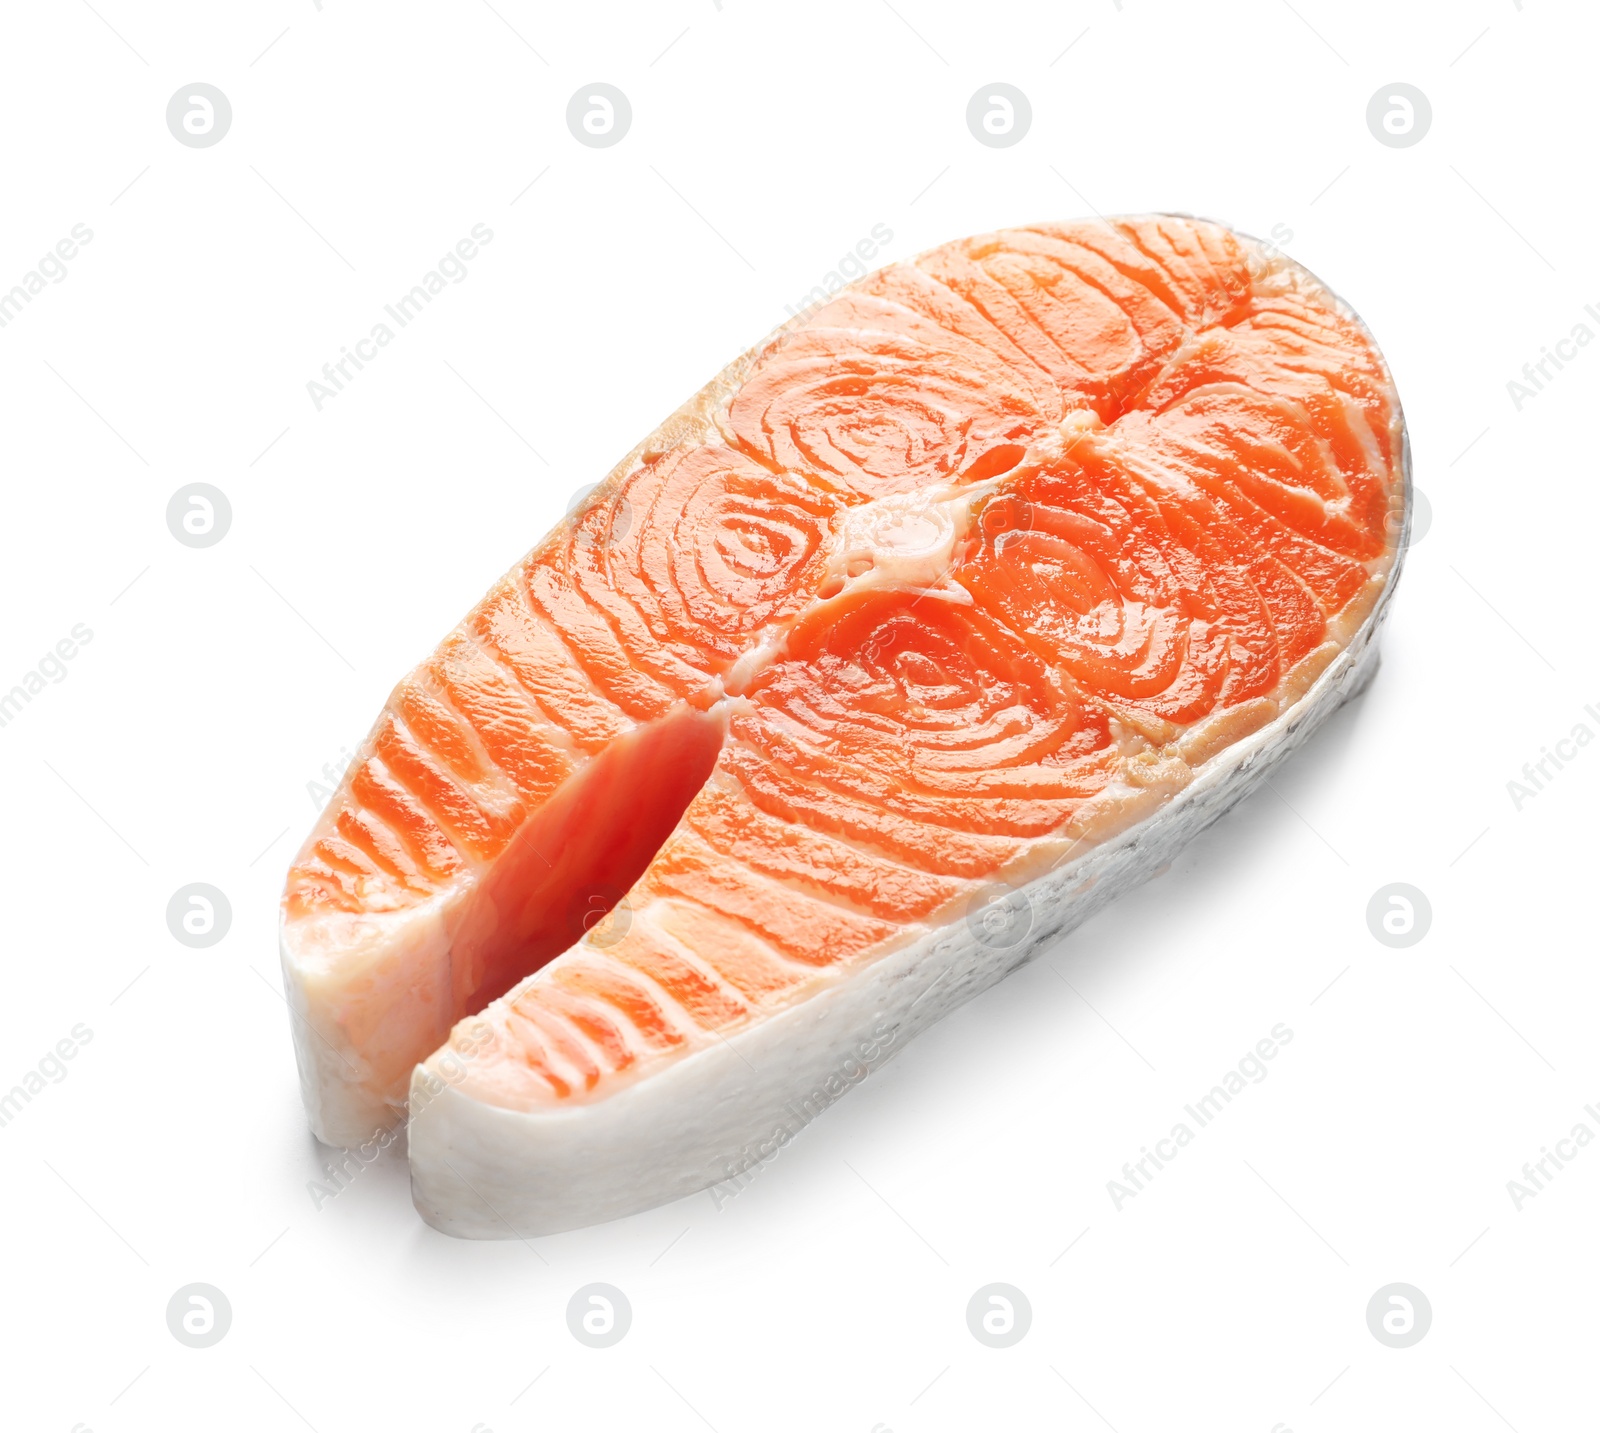 Photo of Raw salmon steak on white background. Natural food high in protein